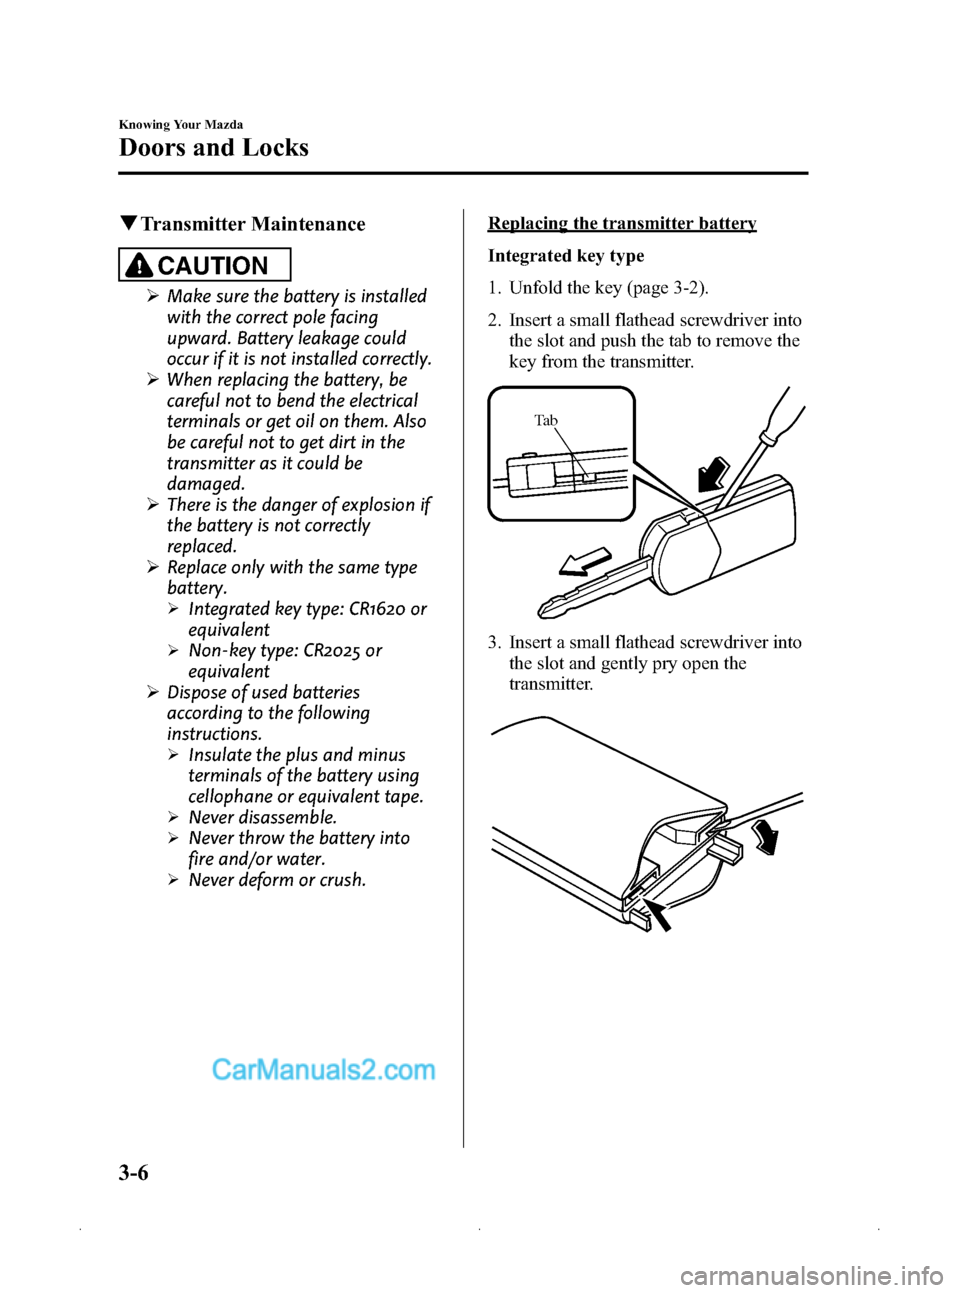 MAZDA MODEL MAZDASPEED 3 2009   (in English) Manual PDF Black plate (80,1)
qTransmitter Maintenance
CAUTION
Ø Make sure the battery is installed
with the correct pole facing
upward. Battery leakage could
occur if it is not installed correctly.
Ø When rep